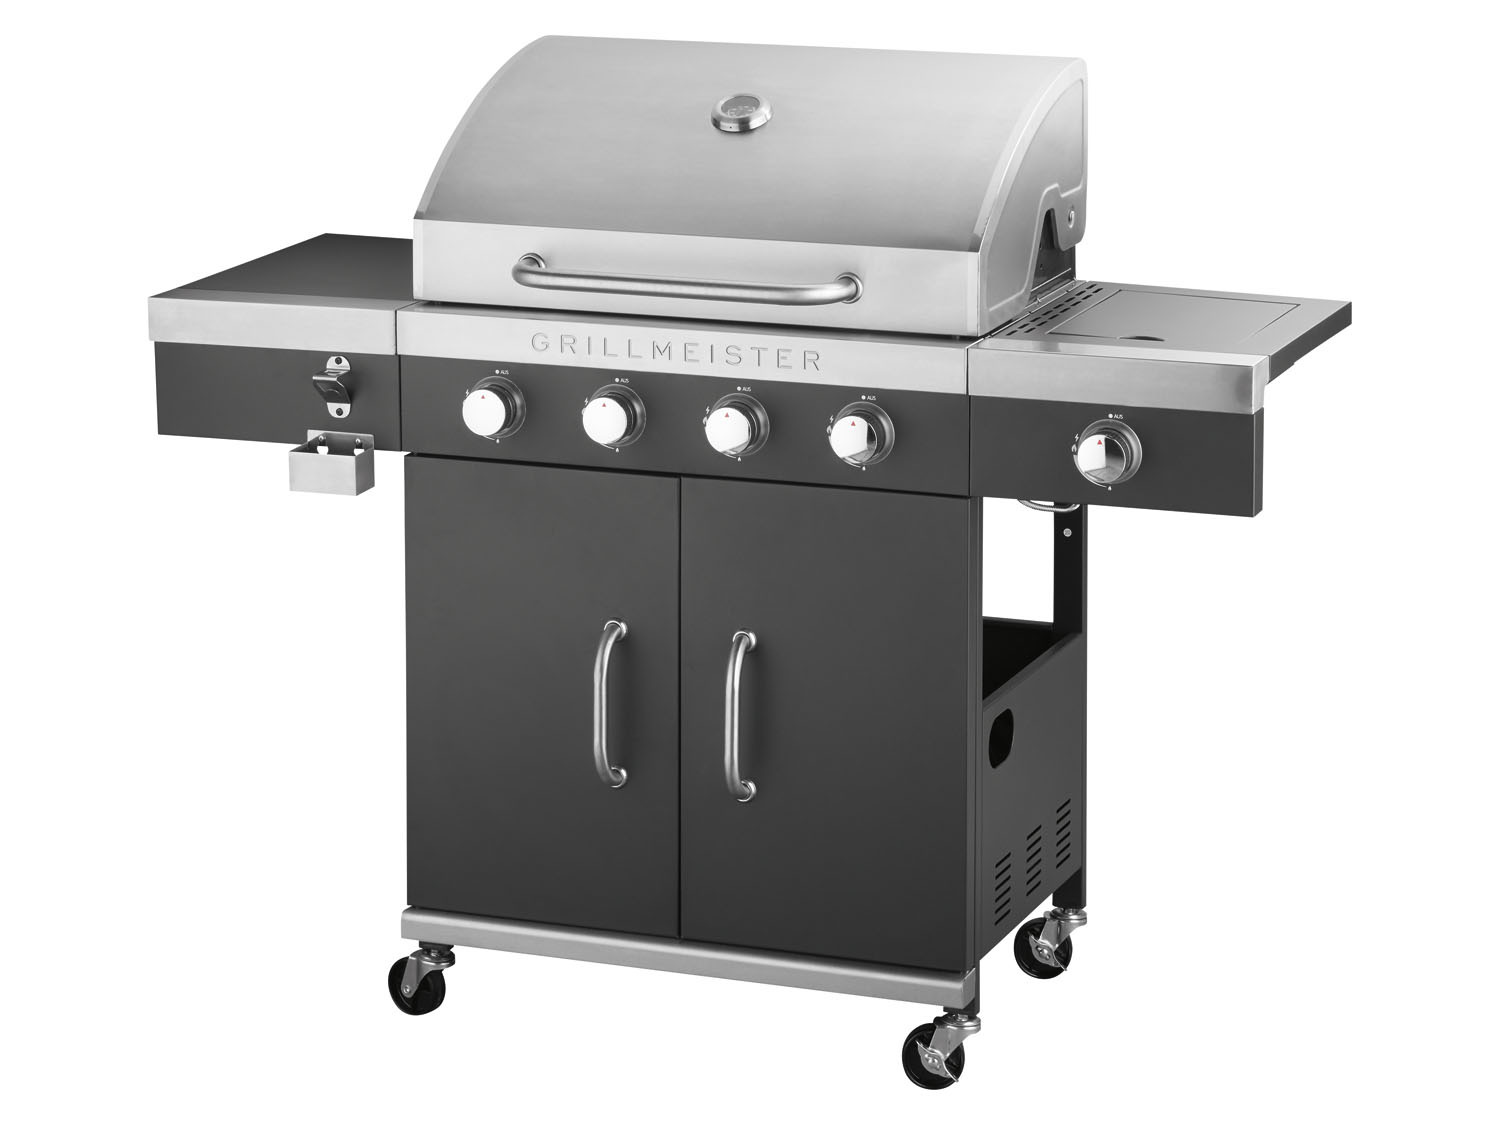 GRILLMEISTER Gasgrill, | Brenner, kW 19,7 4plus1 LIDL